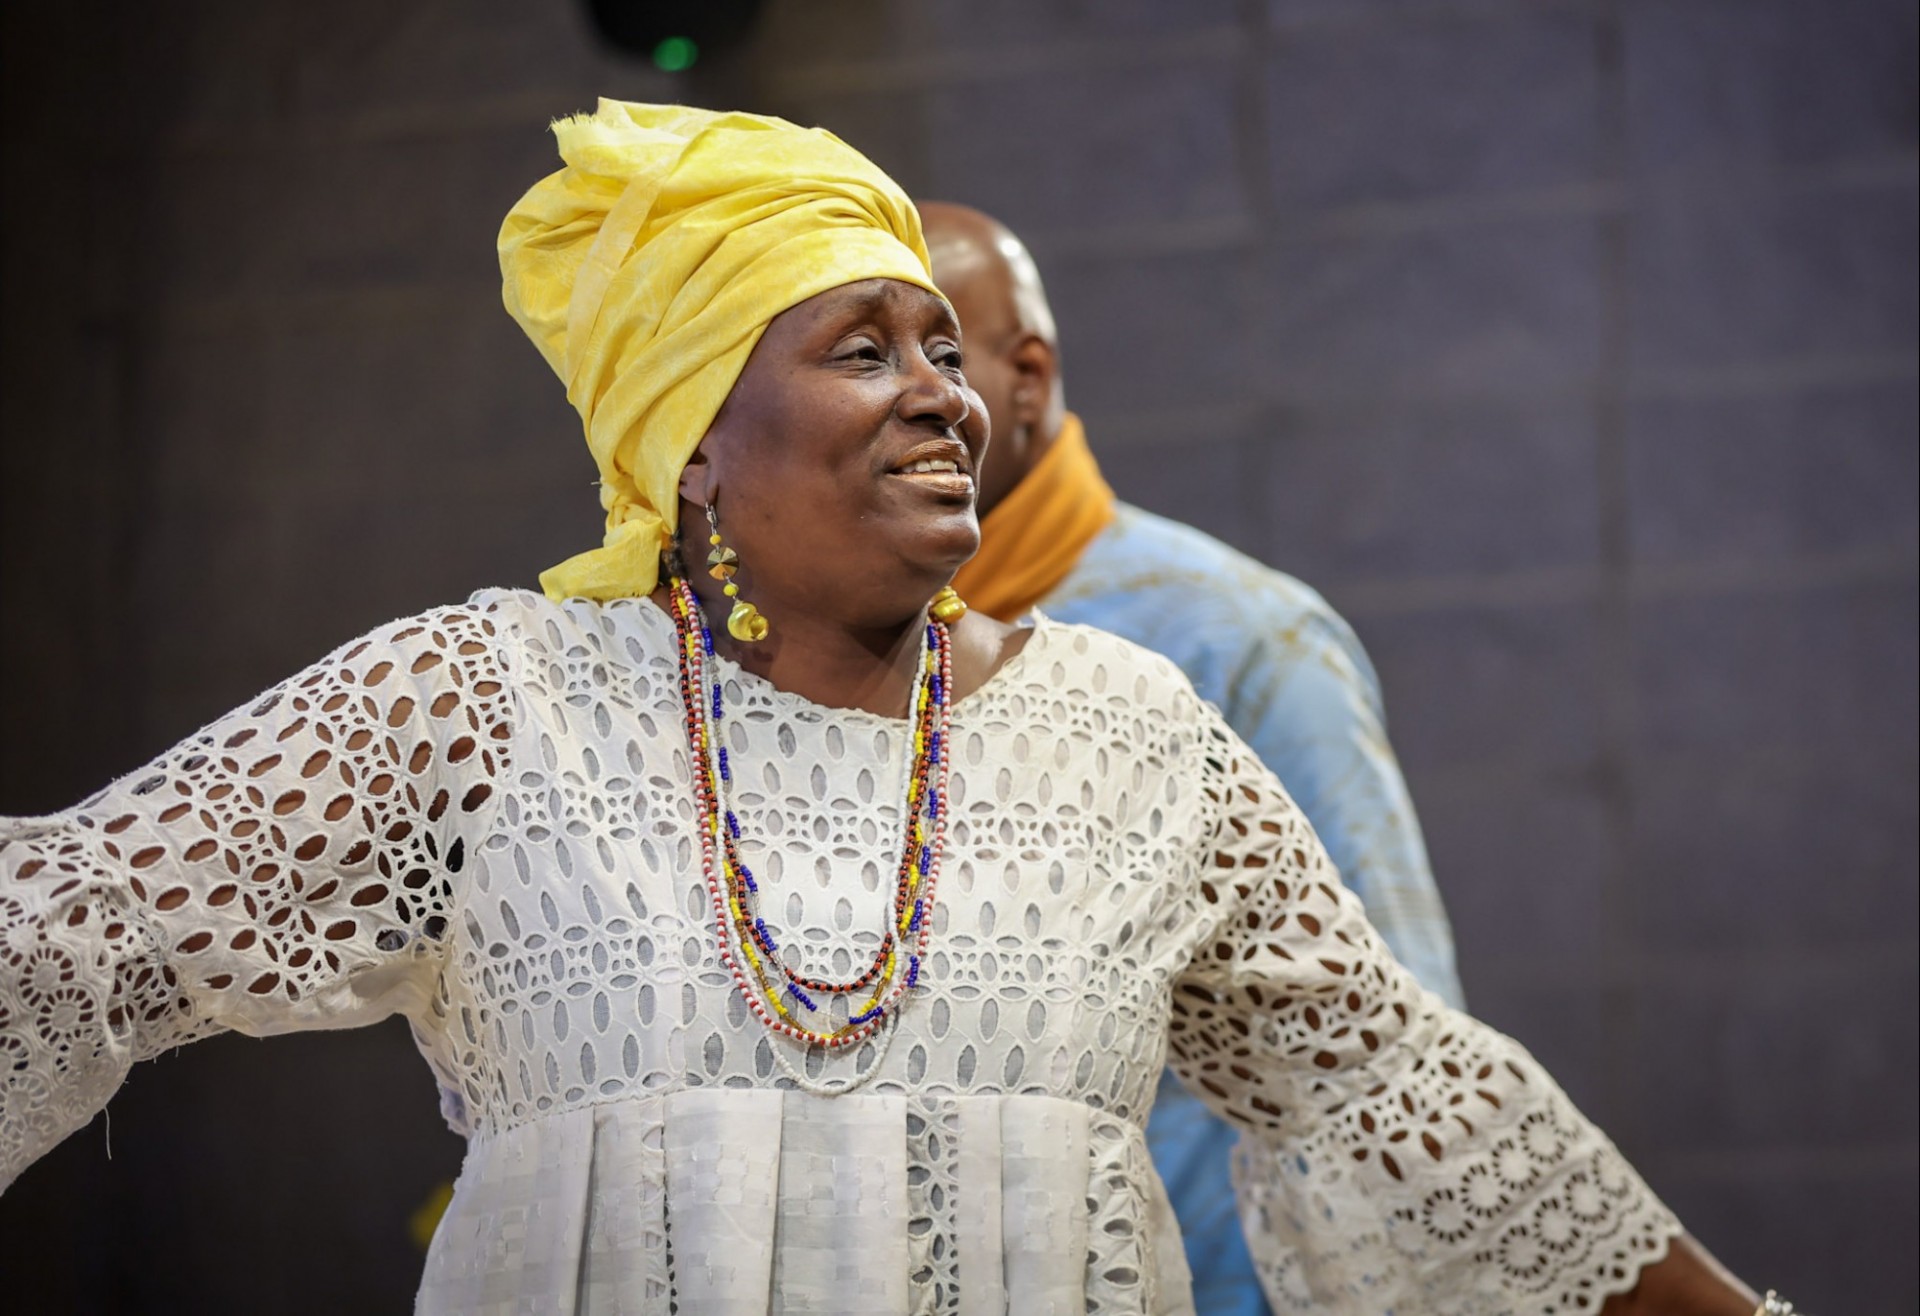 A picture of a Black woman with a white dress and yellow wrap around her head holding her arms out and smiling